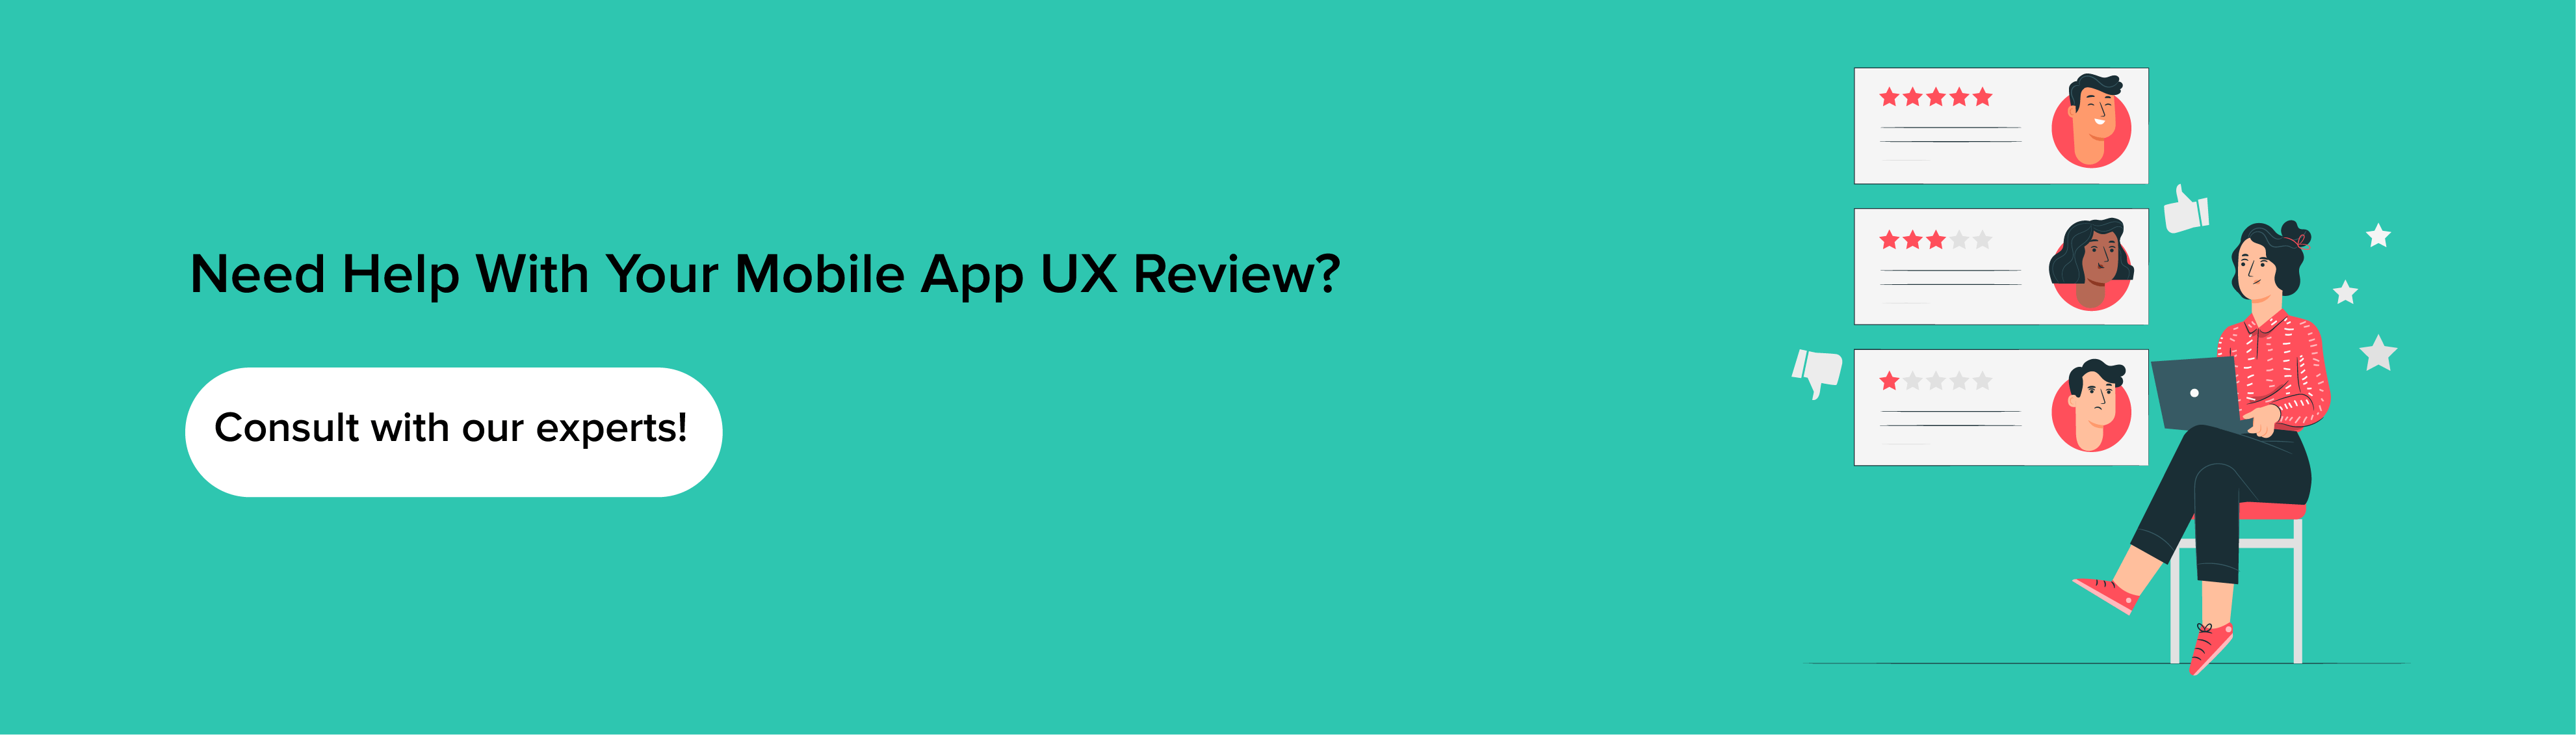 consult our expert for mobile app ux review